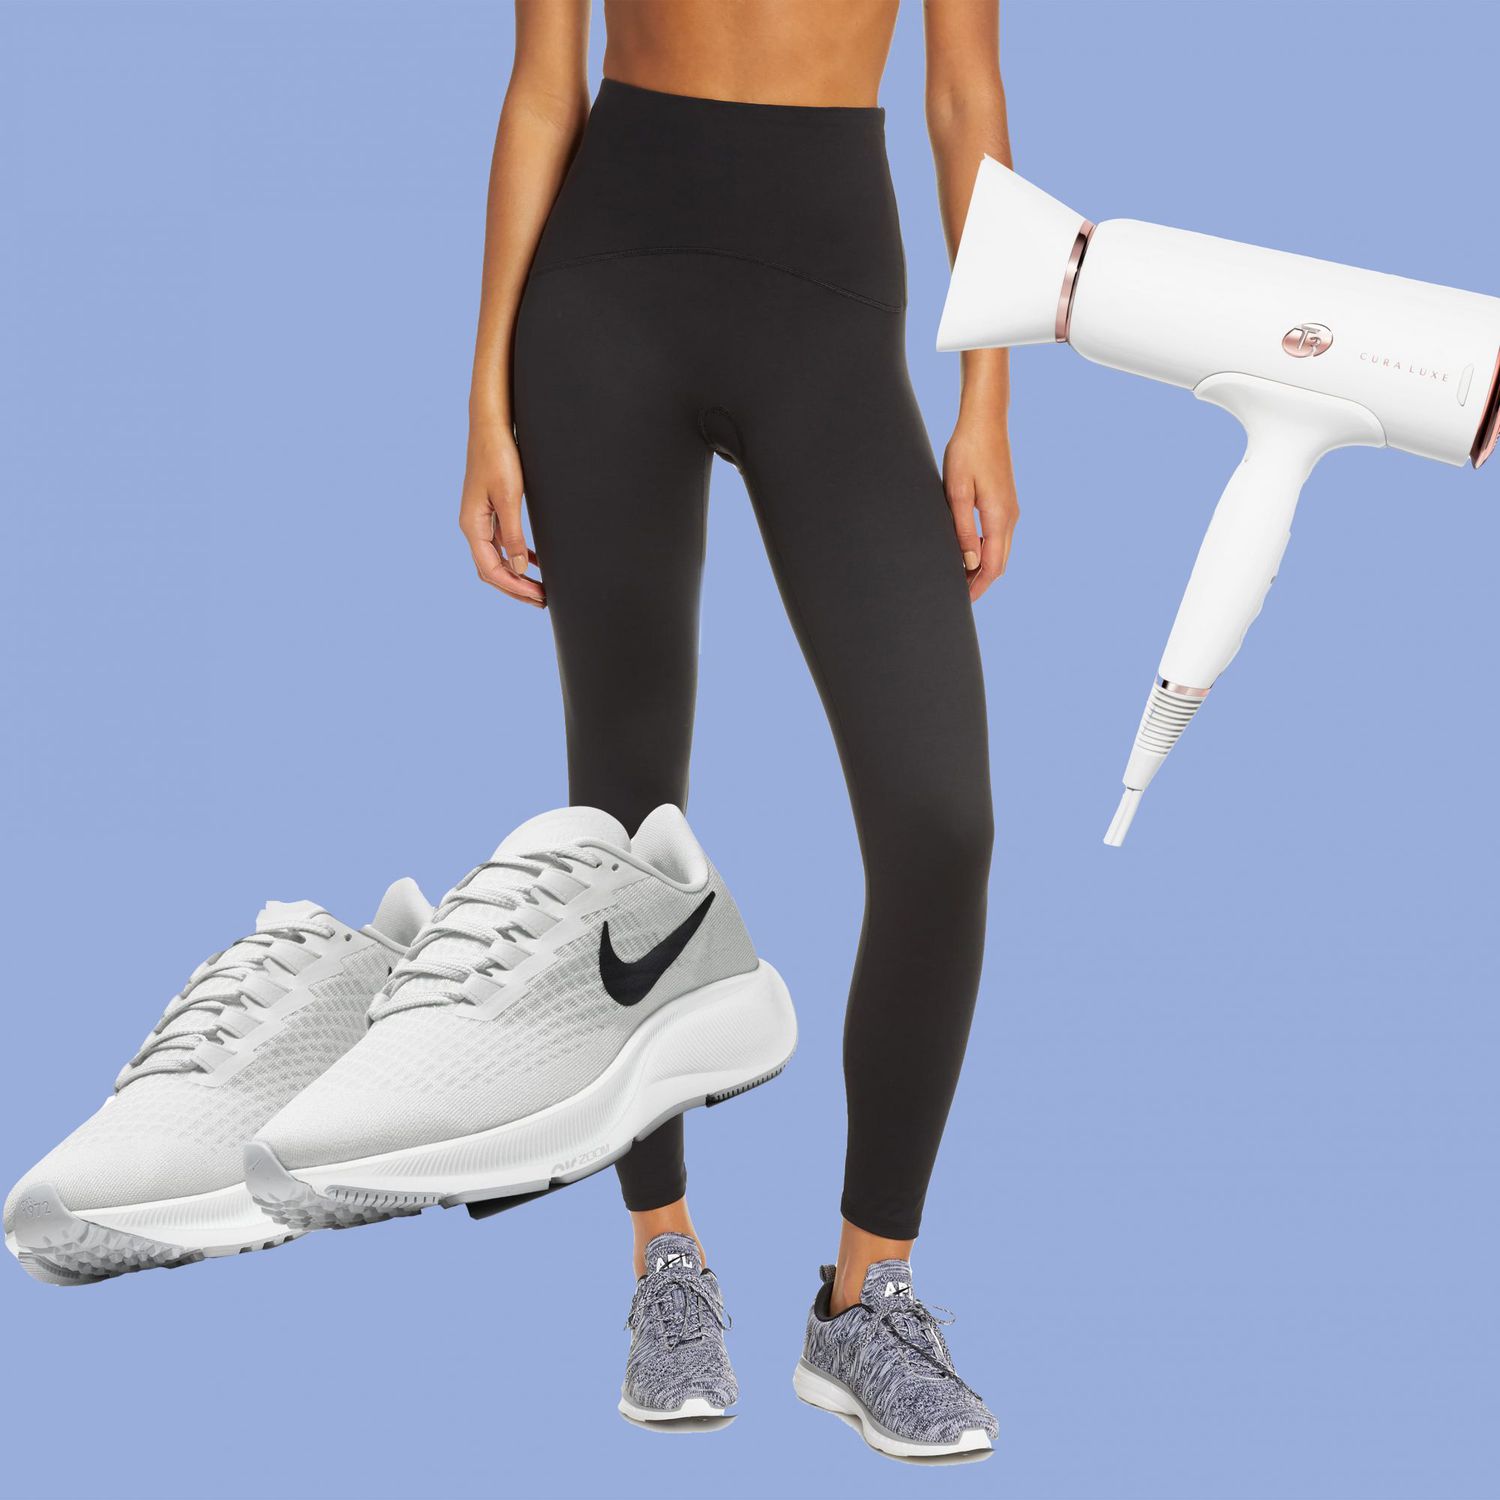 Nordstrom Anniversary Sale 2020 with spanx booty boost leggings white nike pegasus tennis shoes and white t3 hairdryer on blue background